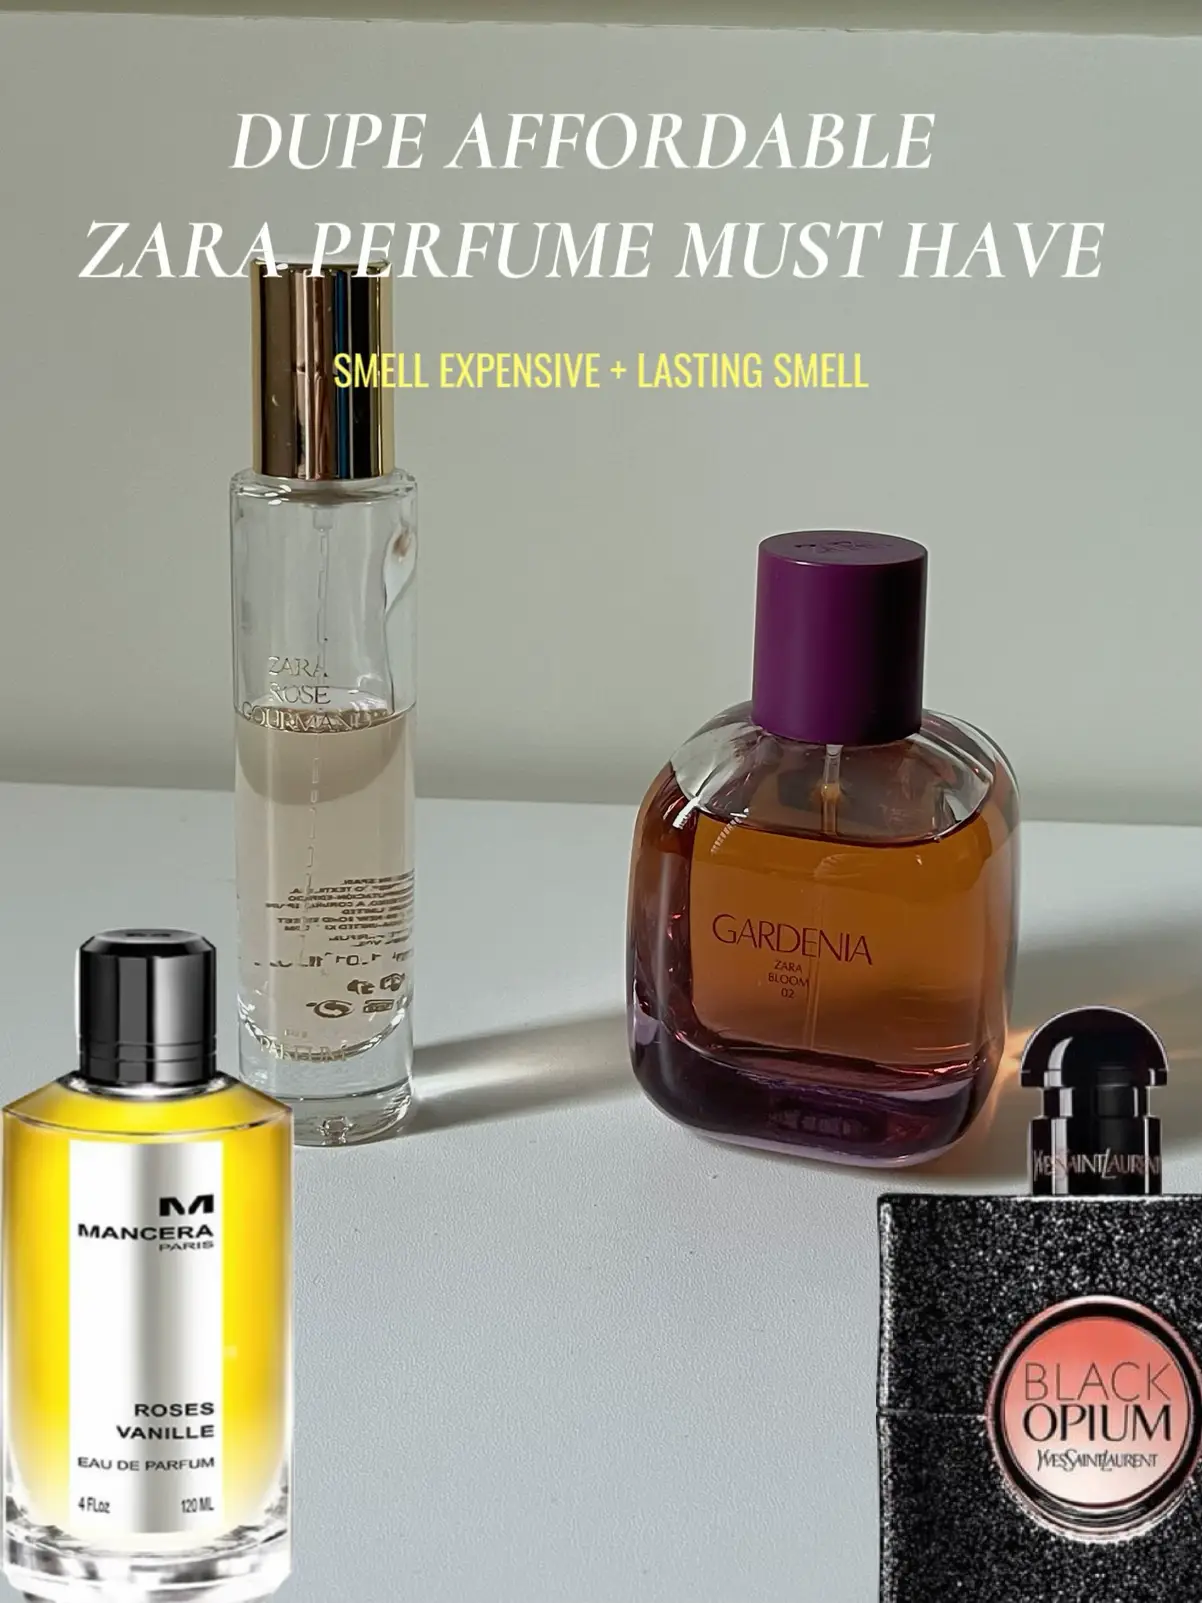 Zara Perfume Is Going Viral on Tiktok & Fans Say It a Dupe of the